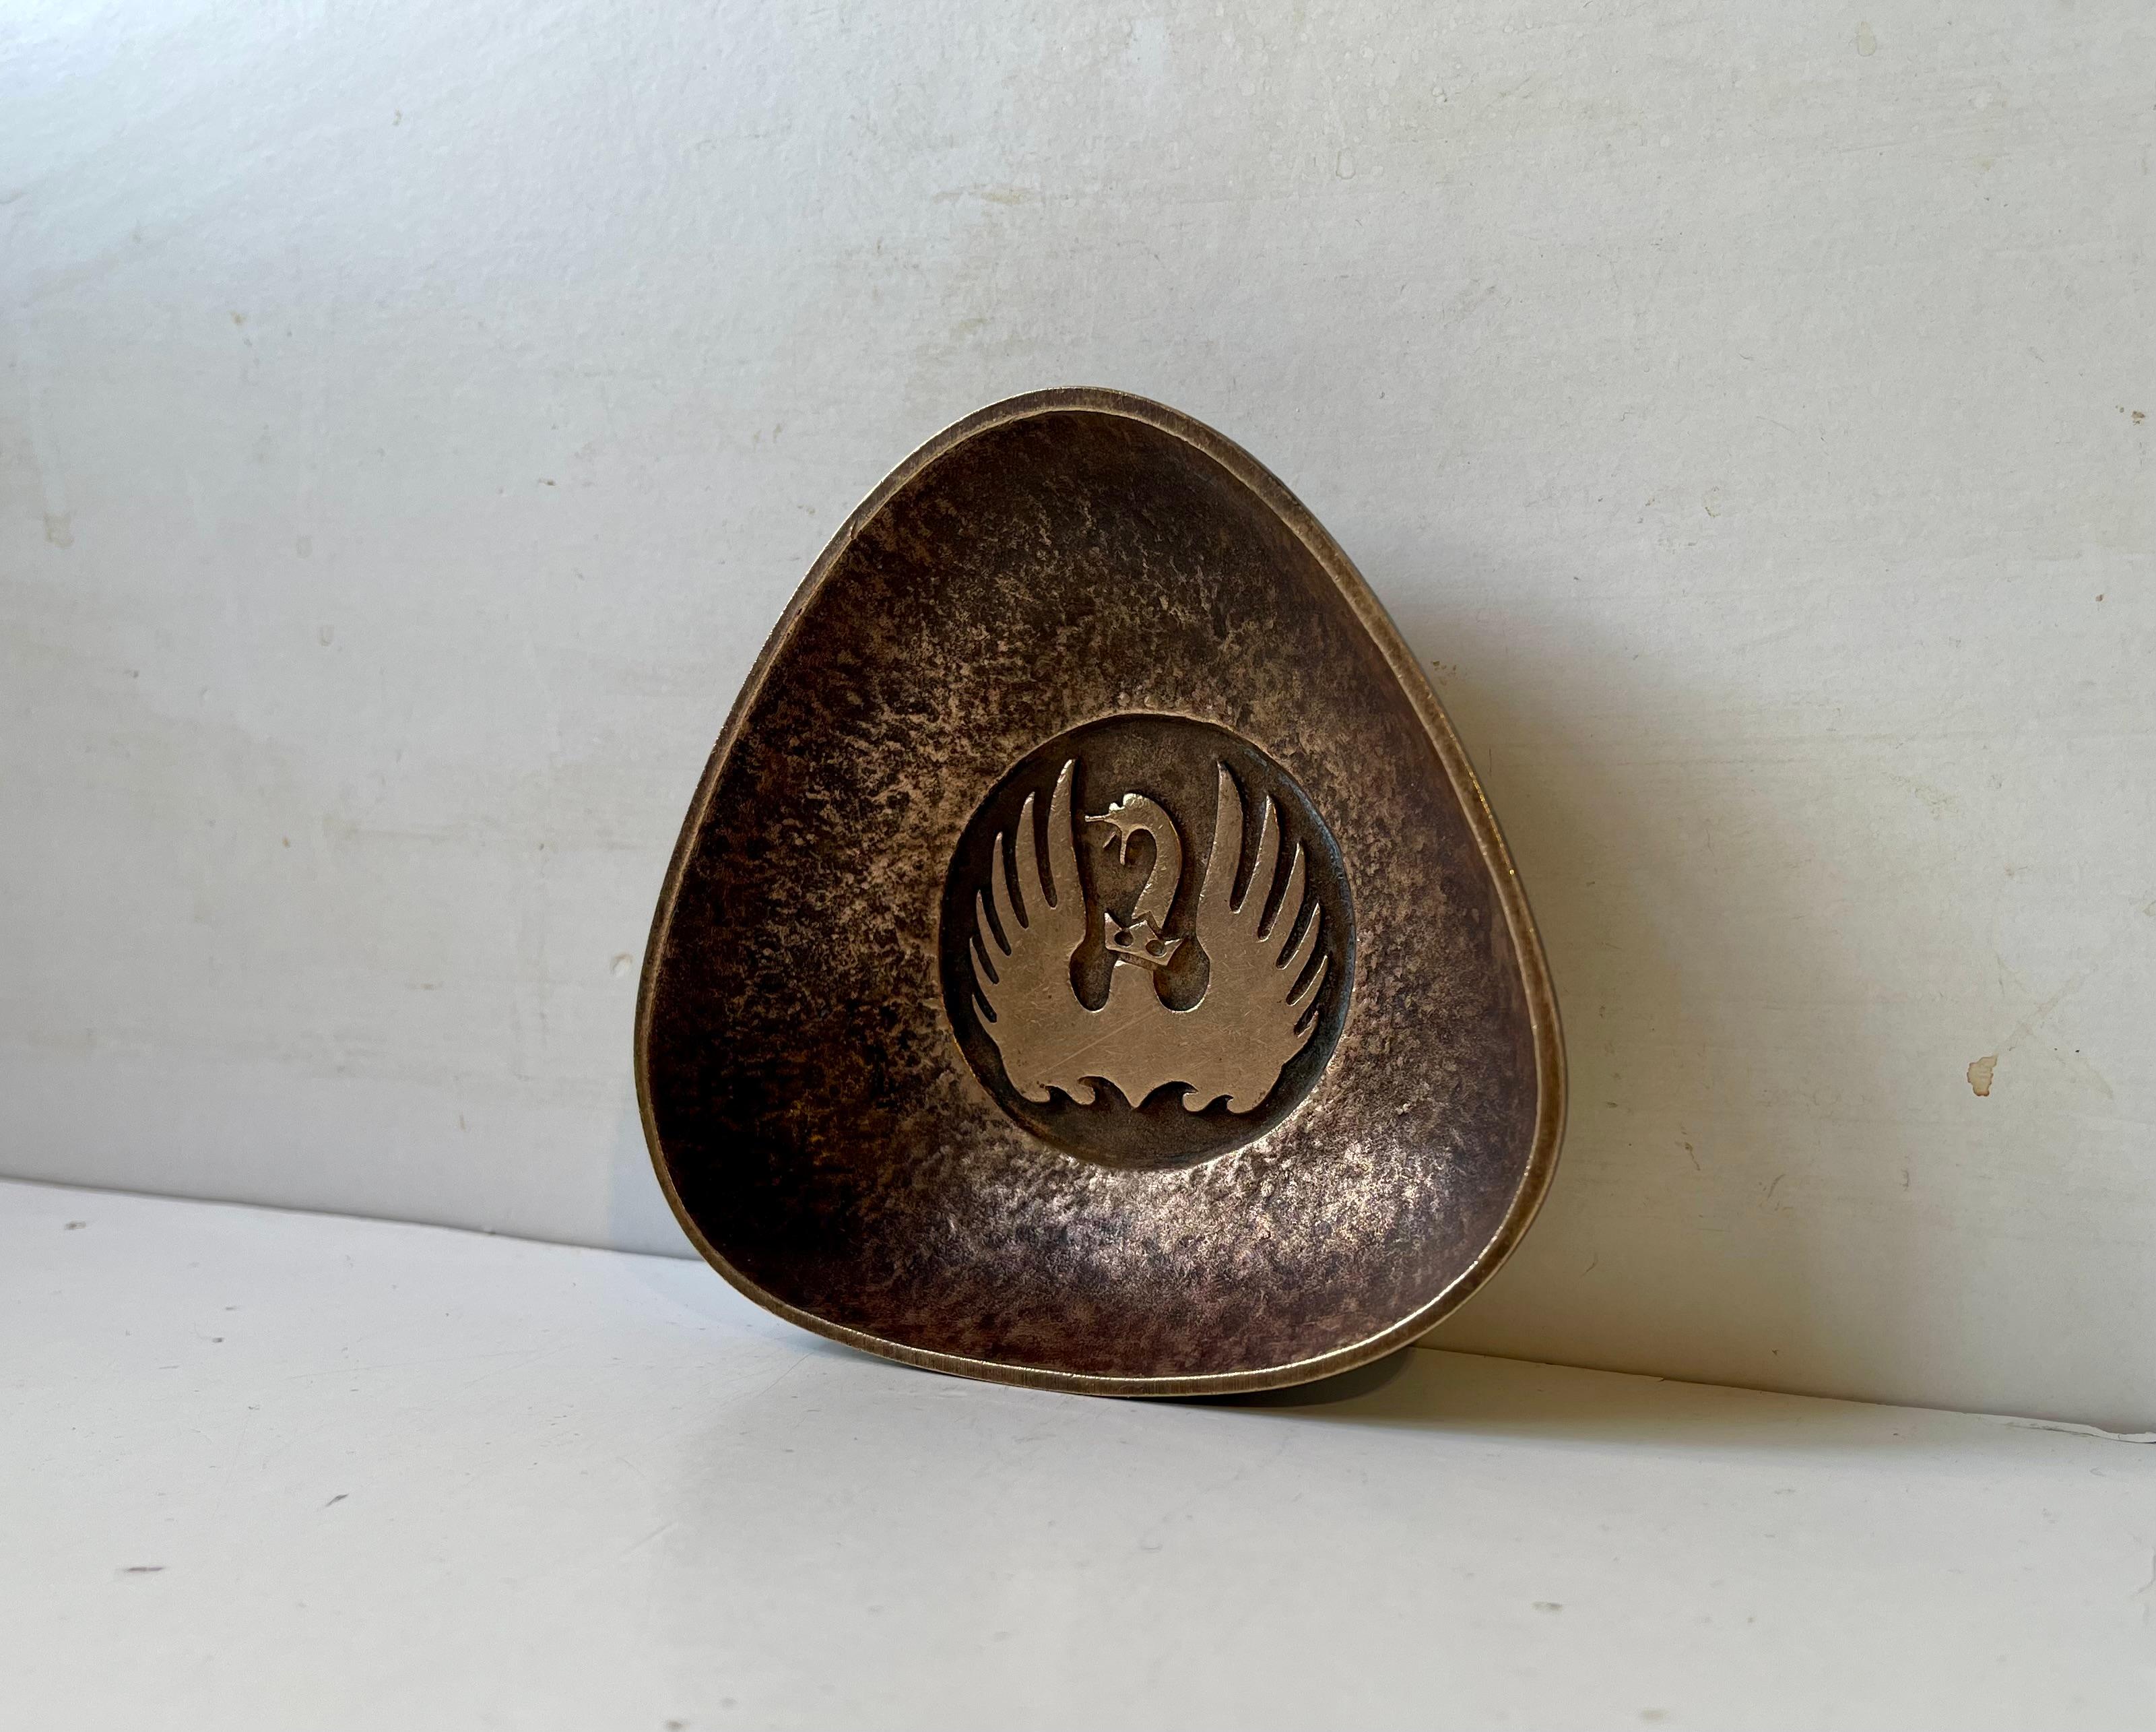 A rare lue gilded rounded triangular bronze dish or ashtray by Danish Sculptor Svend Villiam Peder Lindhart (1899-1989). A mythological Art Deco style motif of a crowned Swan. Beautiful organic and refined details. Cast at Brødrene Grage's